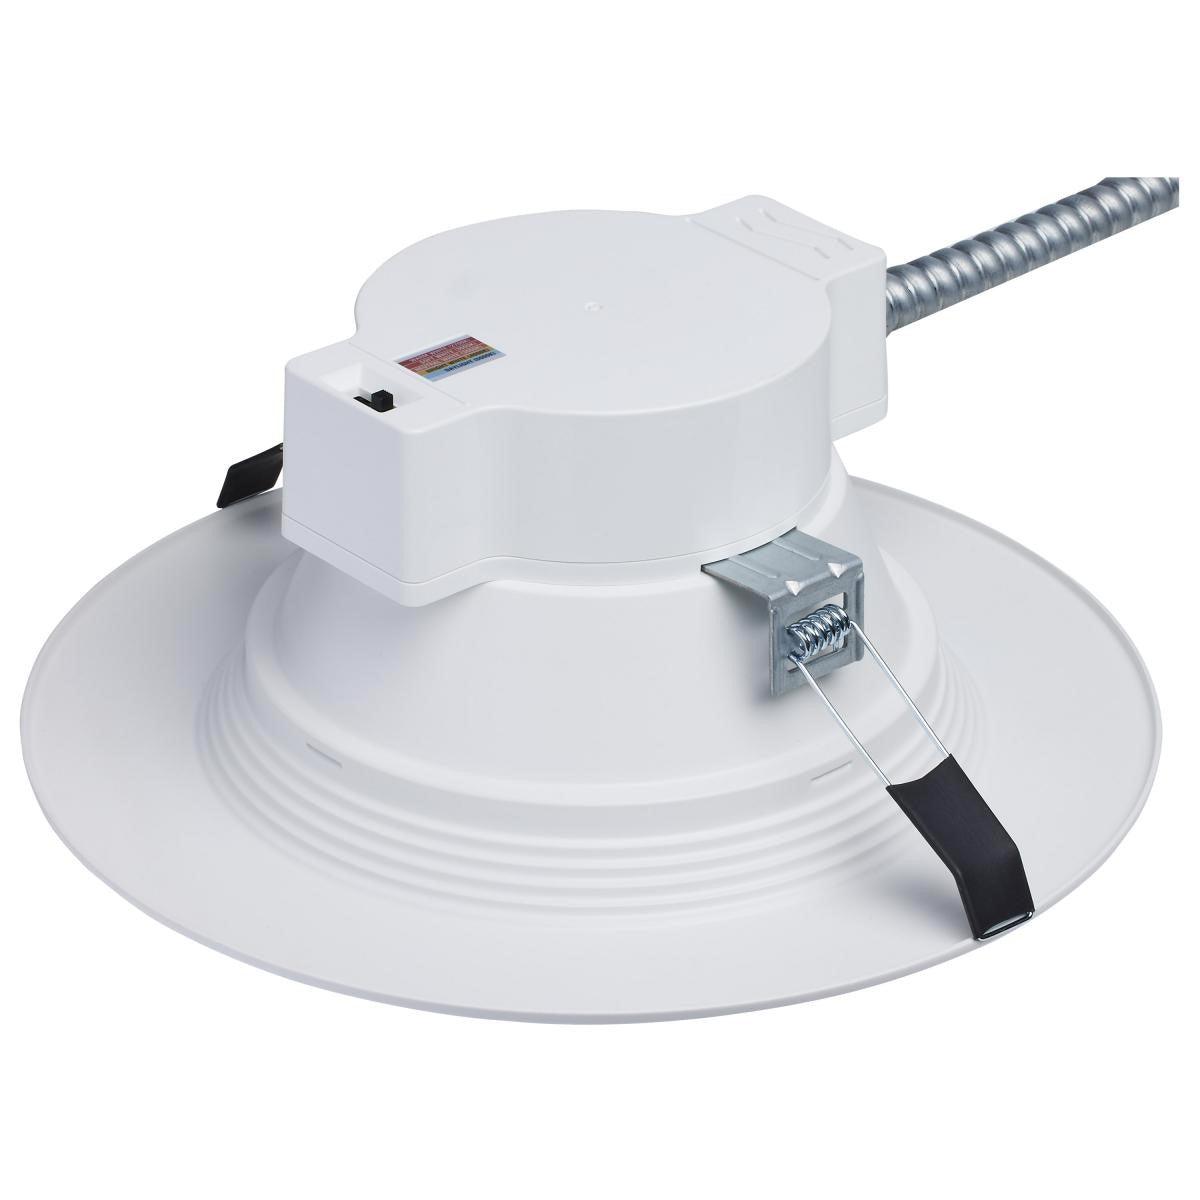 8 Inch Commercial LED Downlight, Round, 22 Watt, 2200 Lumens, Selectable CCT, 2700K to 5000K, Baffle Trim - Bees Lighting